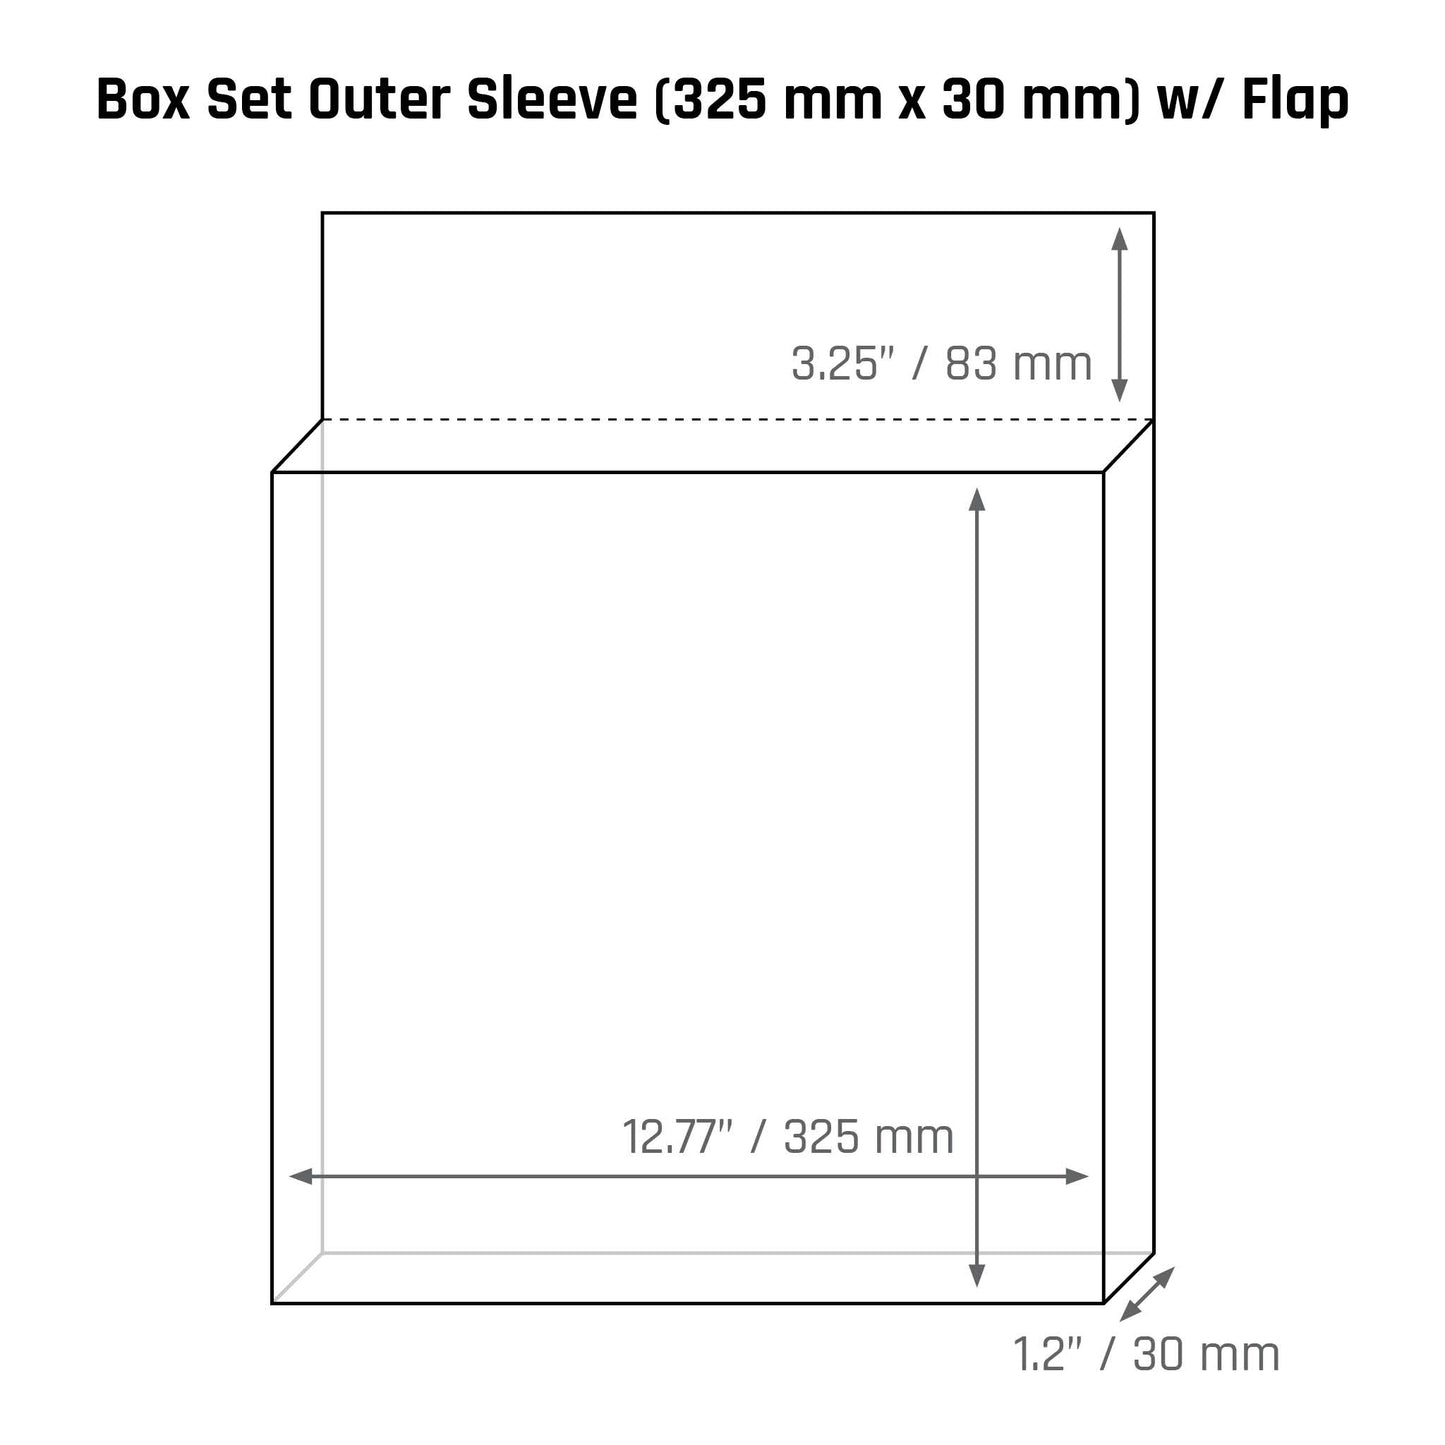 Box Set Outer Sleeve (325 mm x 30 mm) - 3mil - Vinyl Storage Solutions